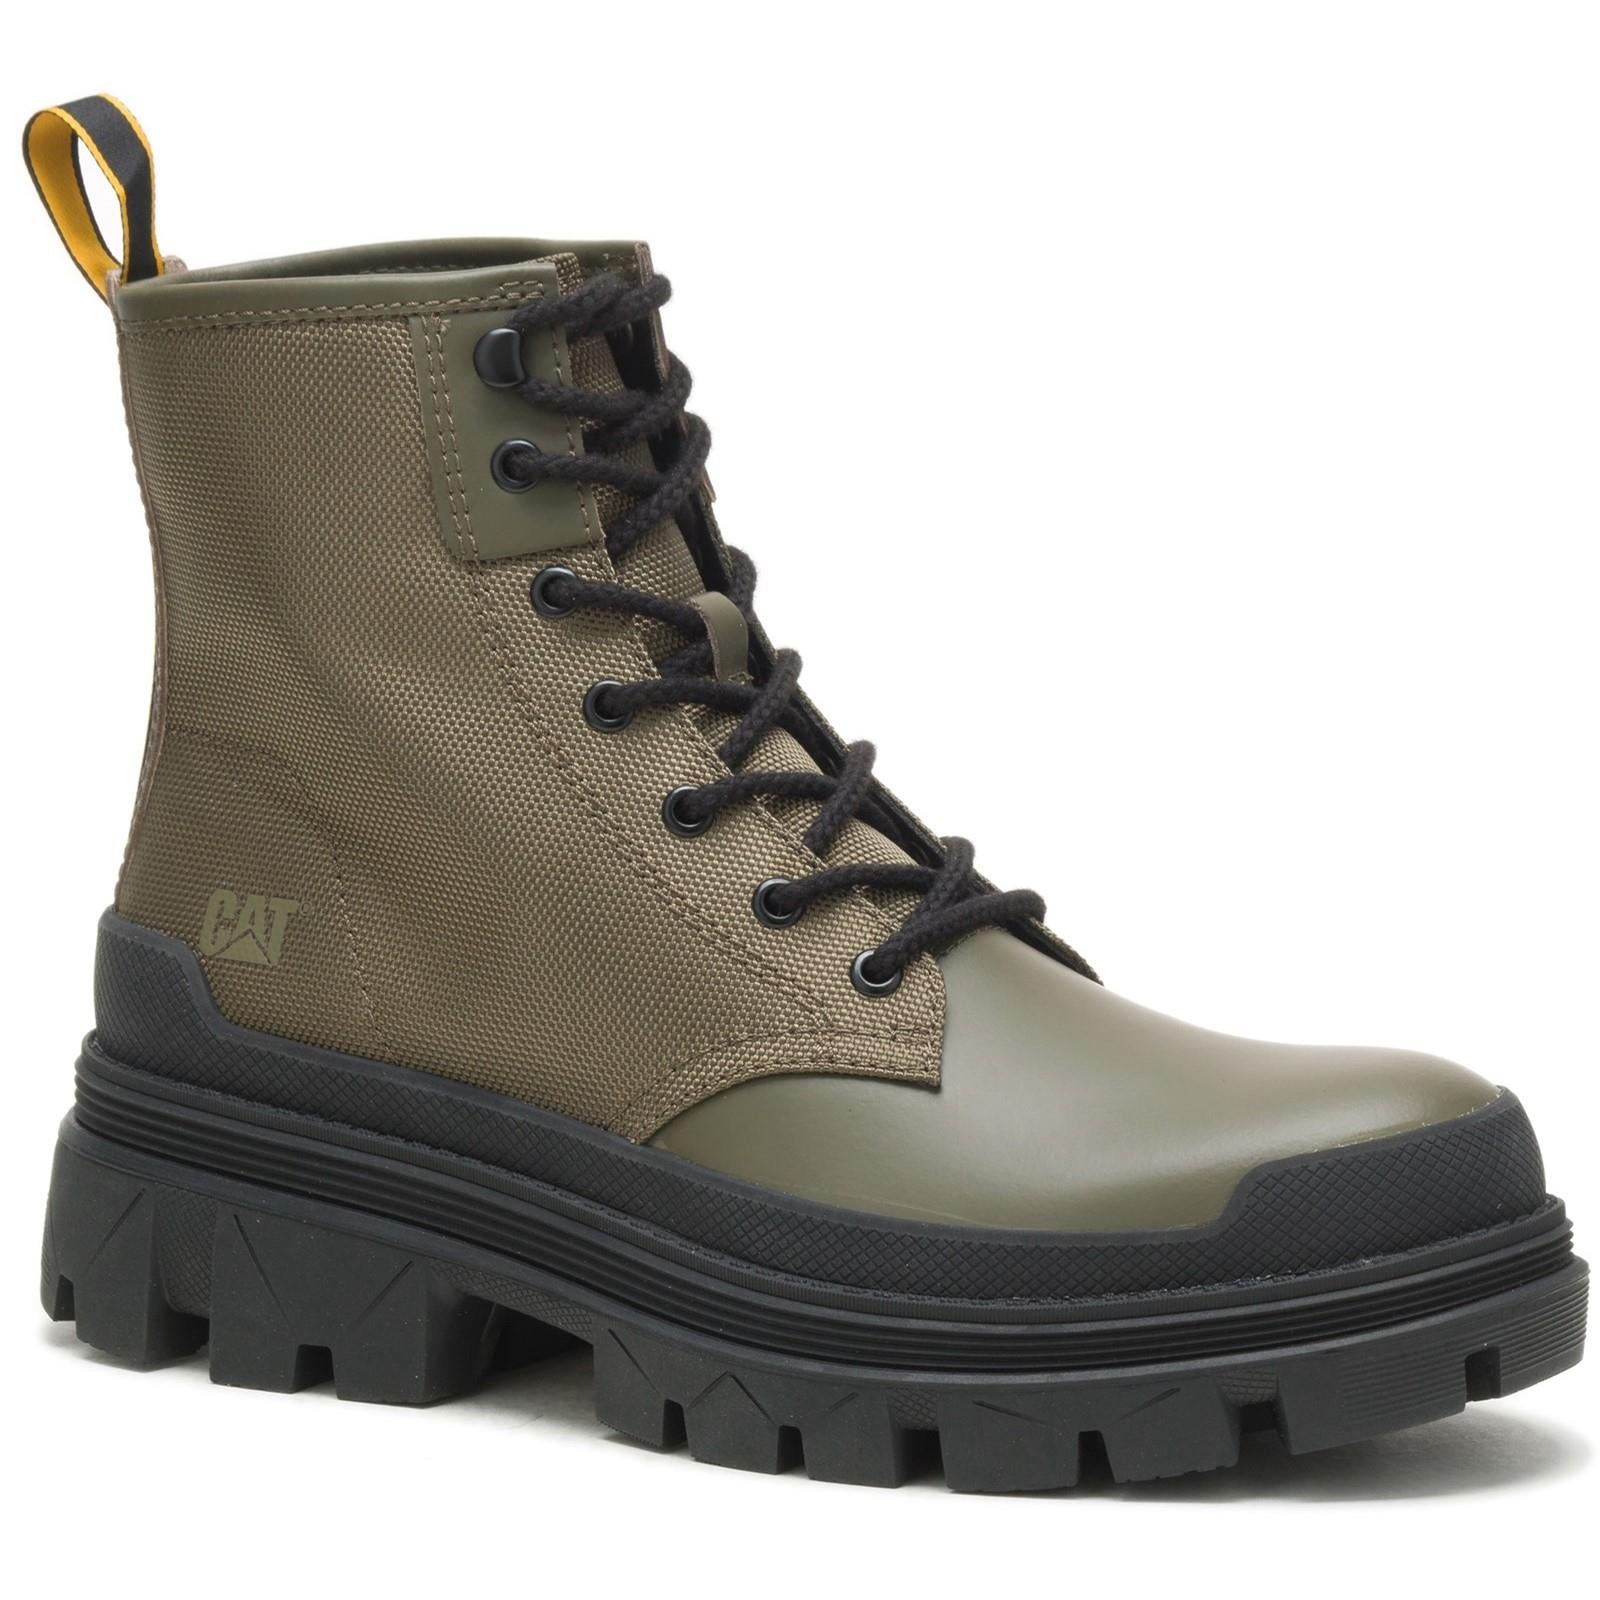 Caterpillar CAT Hardwear Hi olive green leather cushioned lace up boots